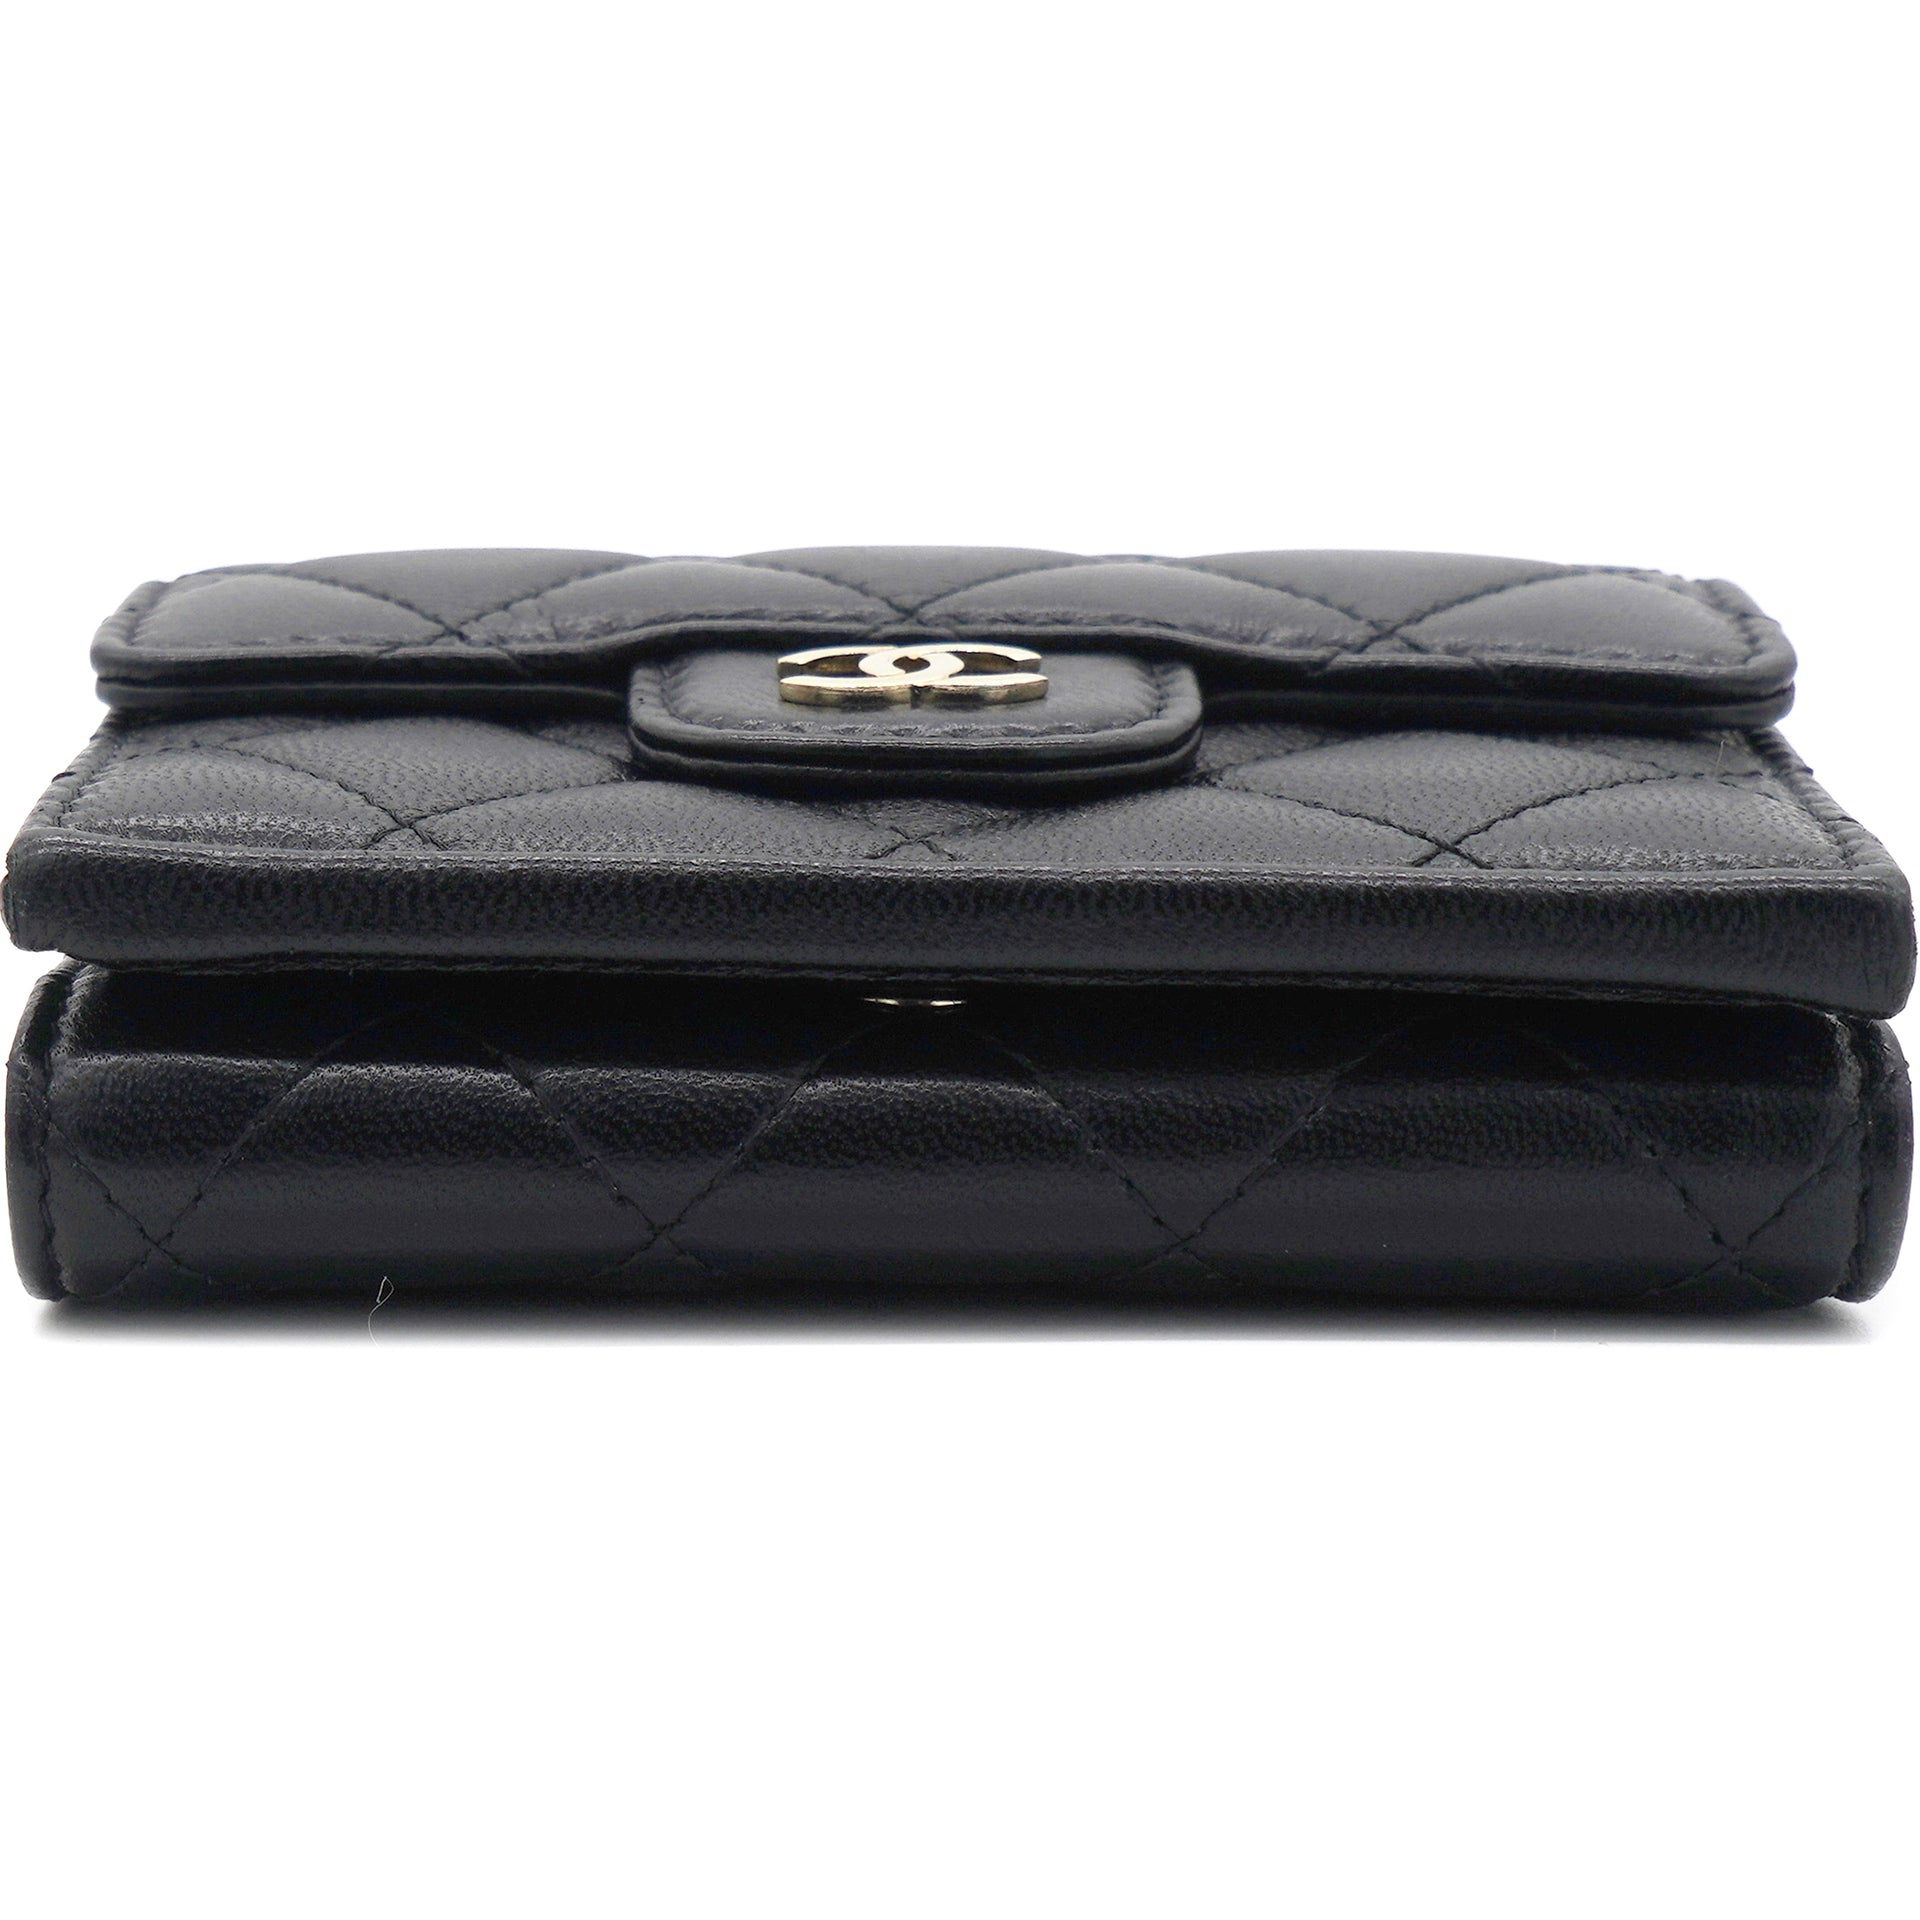 Lambskin Quilted Classic Tri-Fold Wallet Black